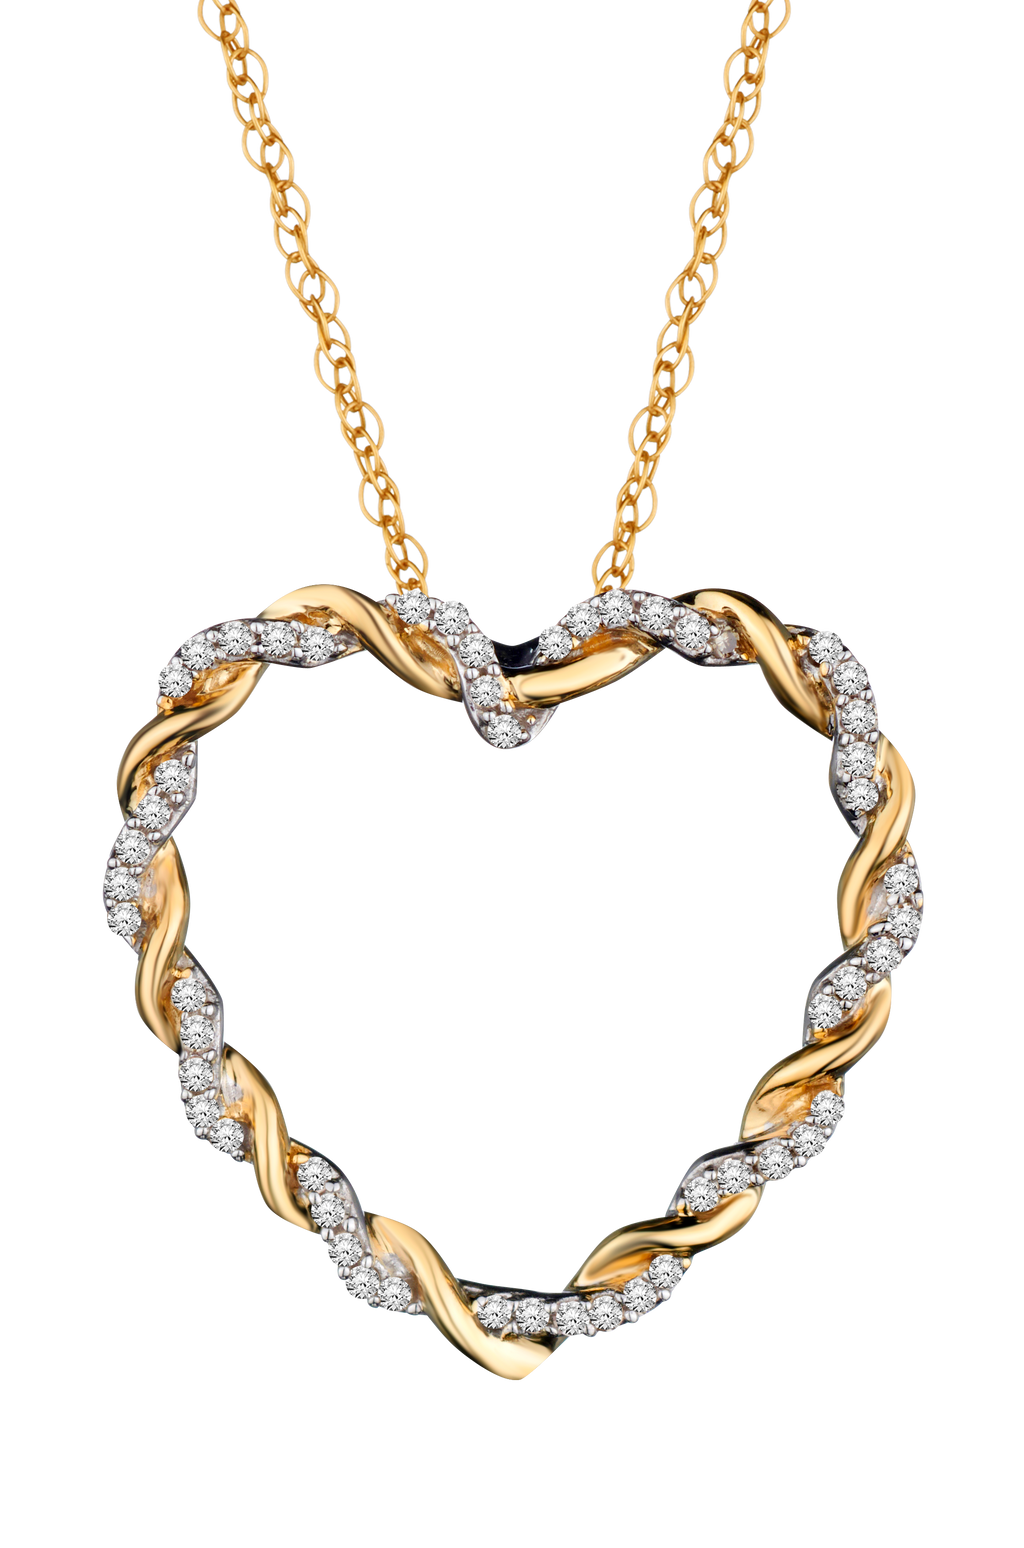 .14 Carat of Diamonds "Entwined" Heart pendant, 10kt Two Tone.....................NOW